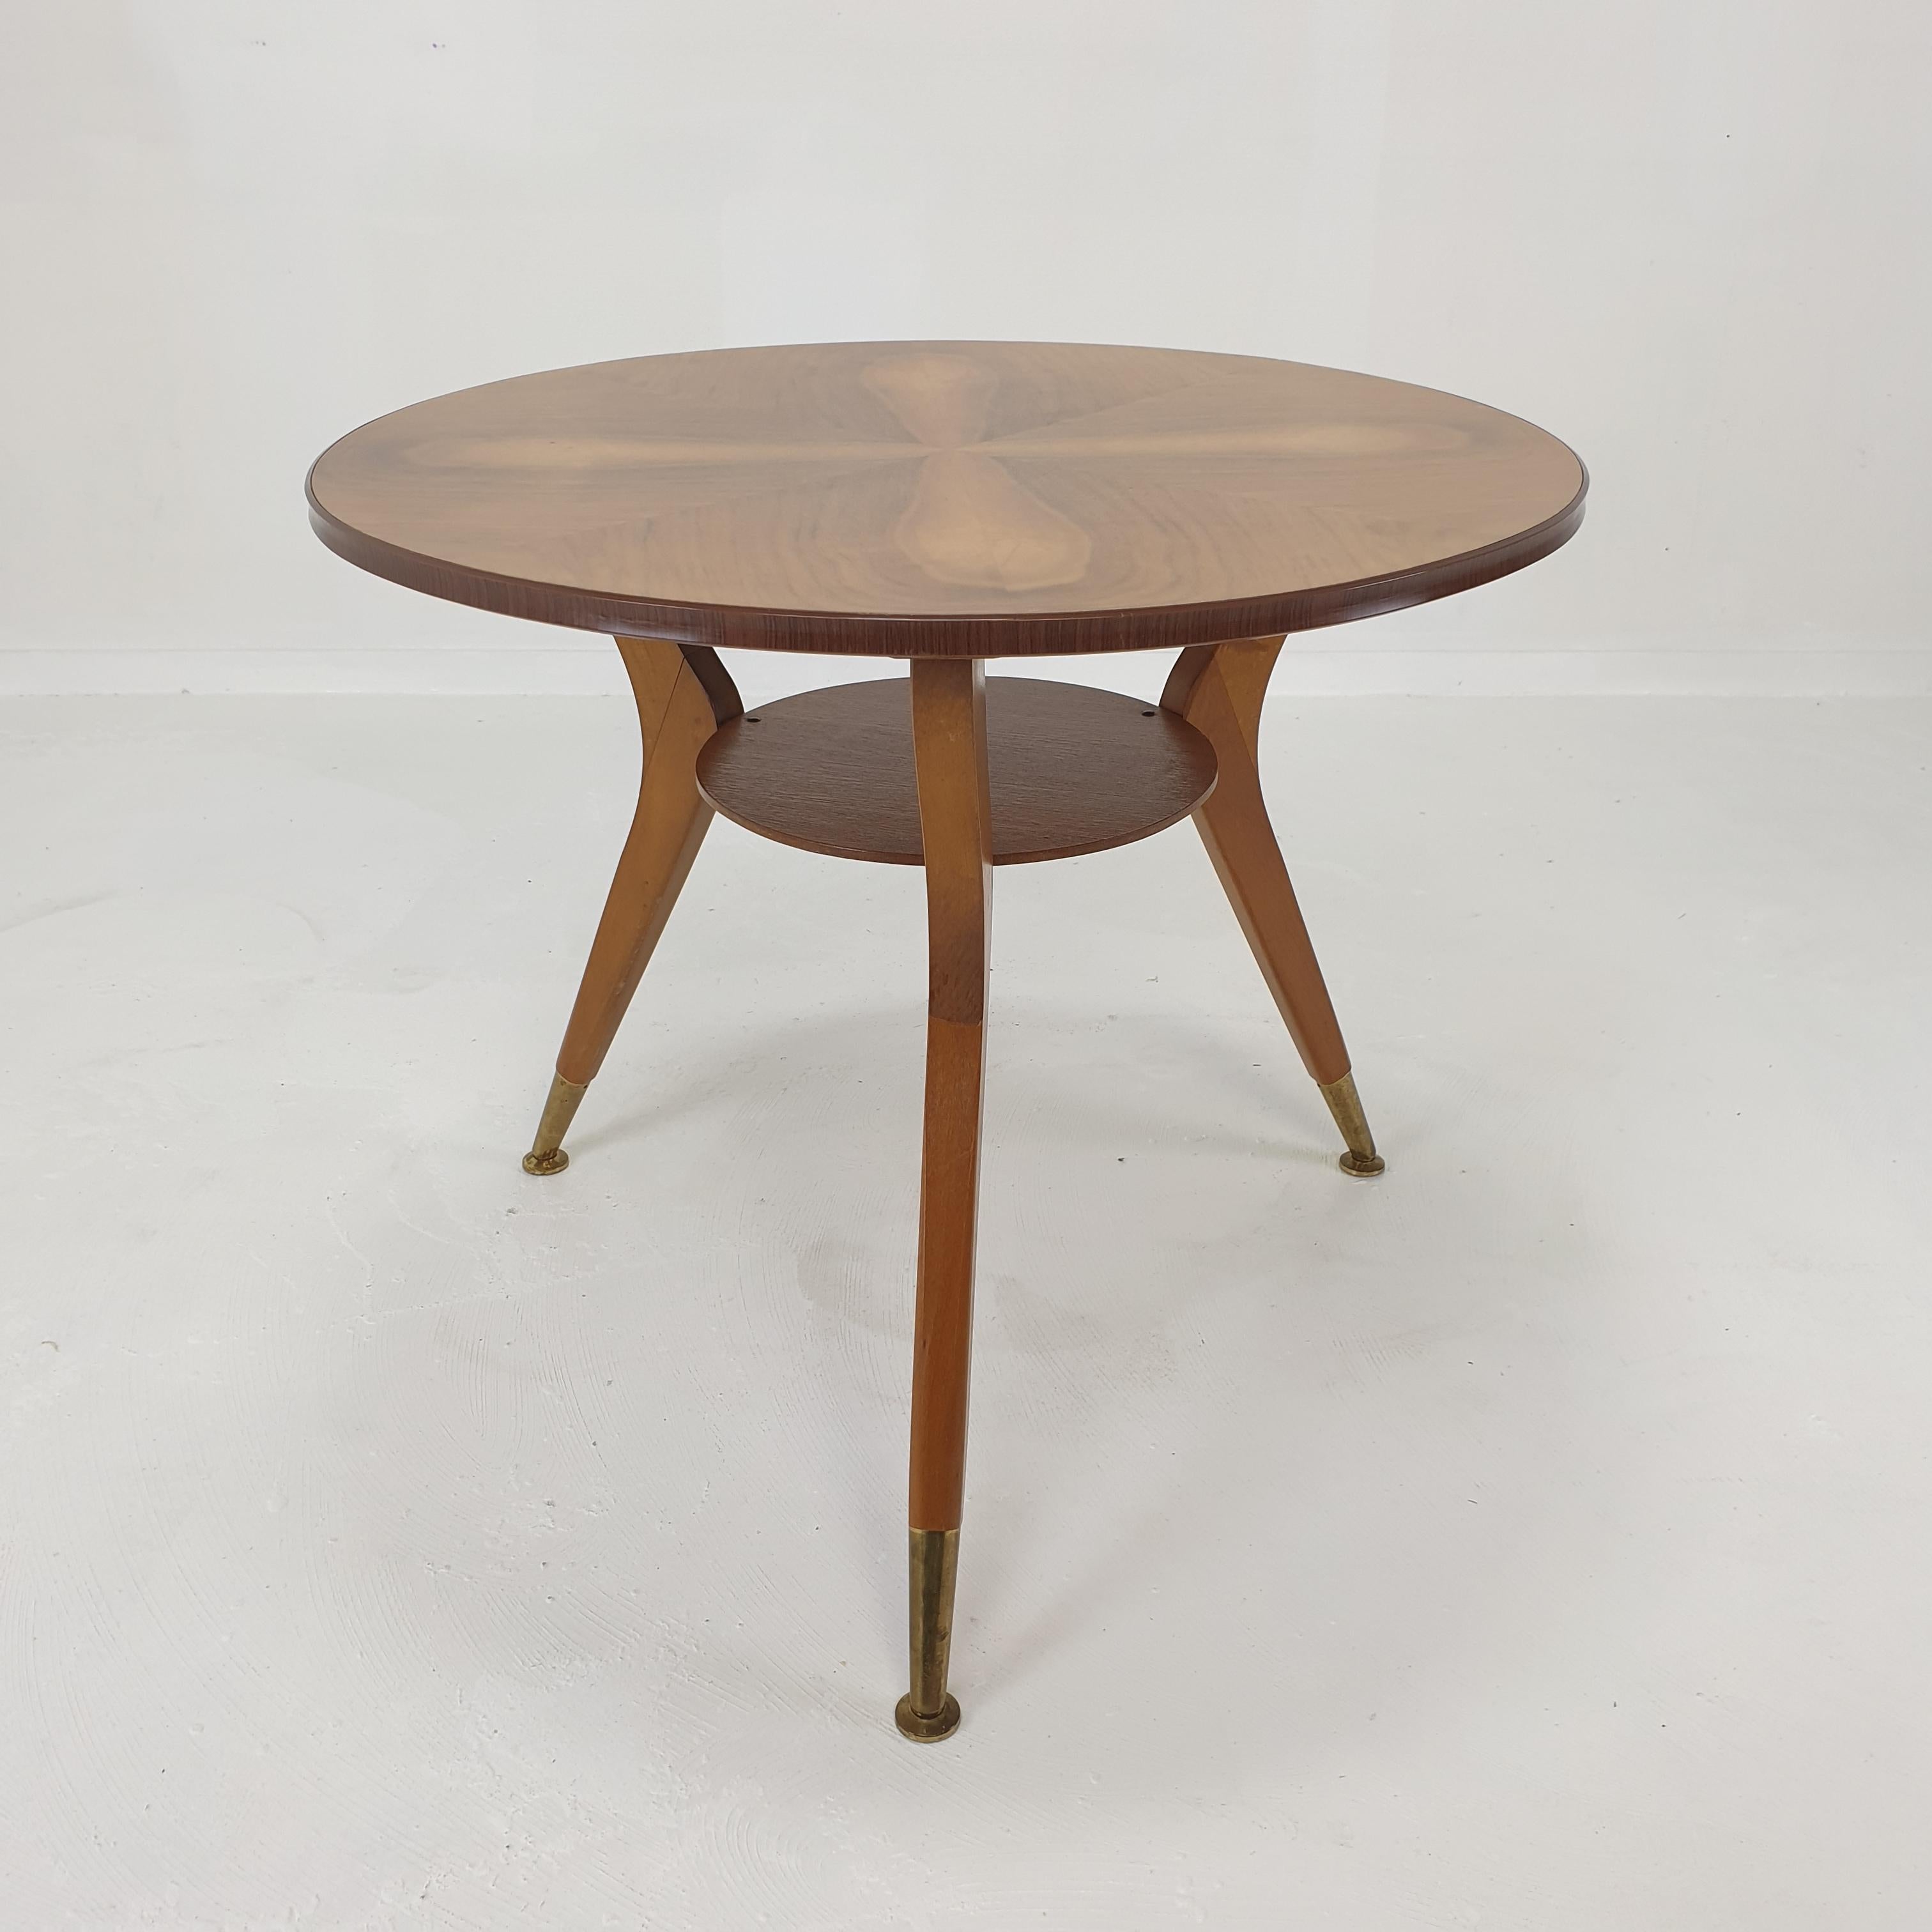 Midcentury Italian Wooden Coffee or Side Table with Brass Feet, 1960s For Sale 4